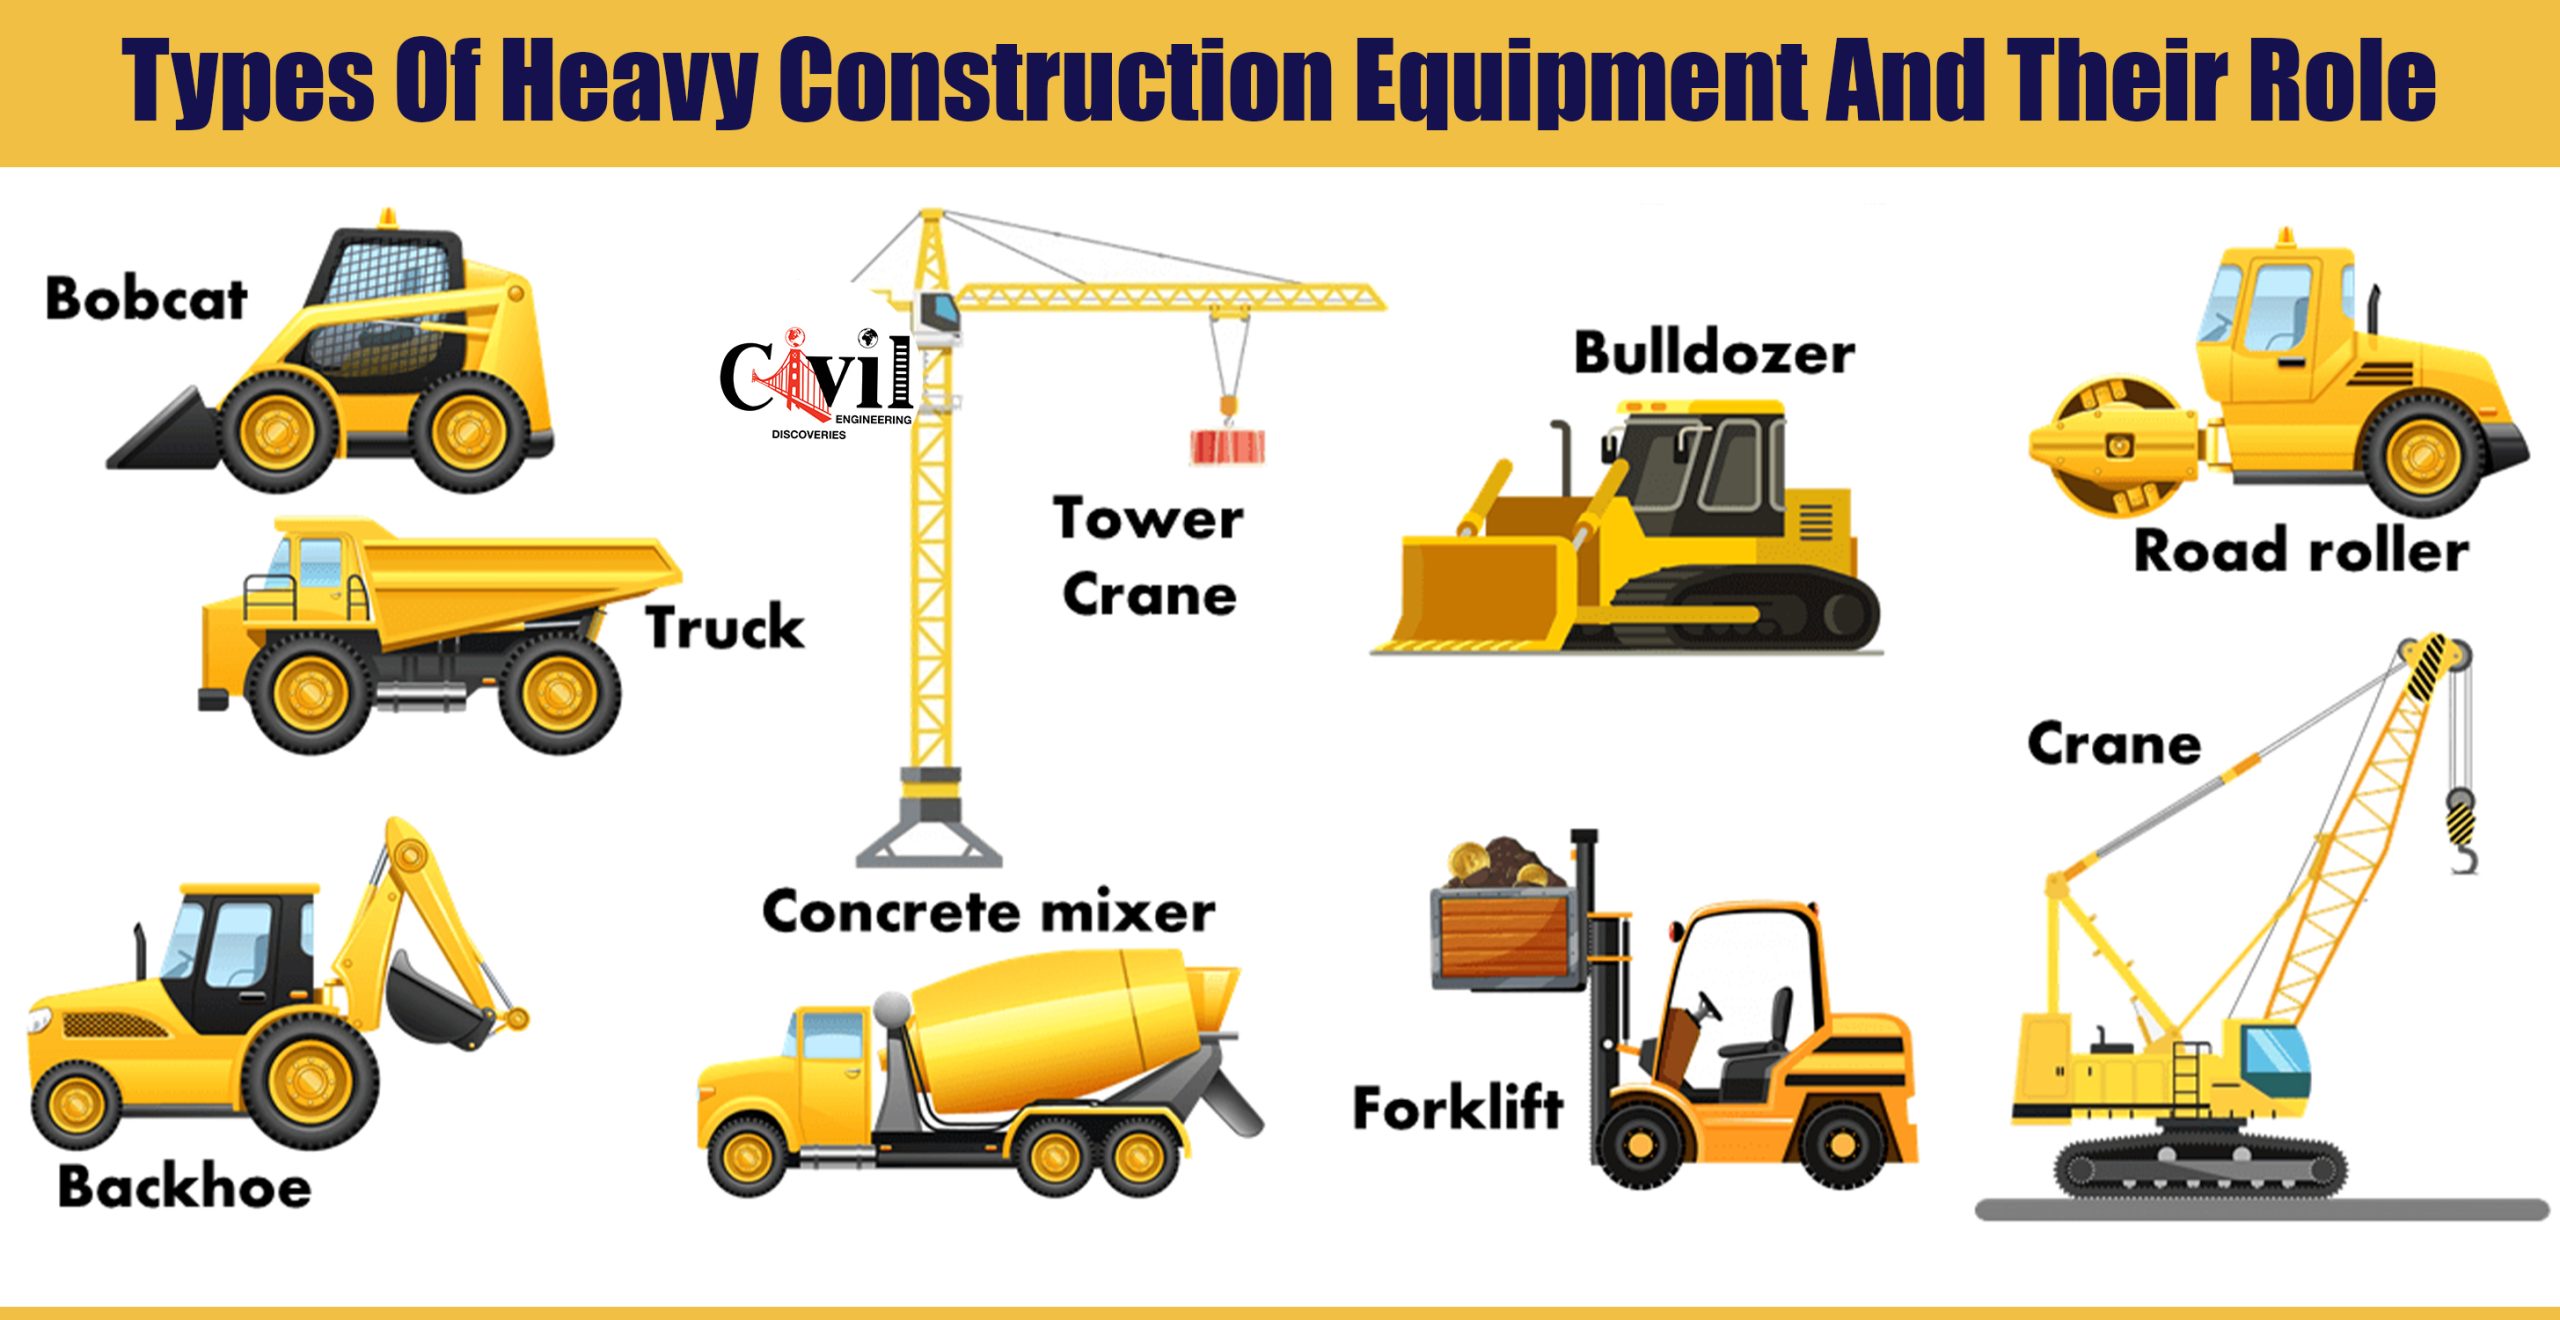 27 Types of Heavy Construction Equipment and Their Uses